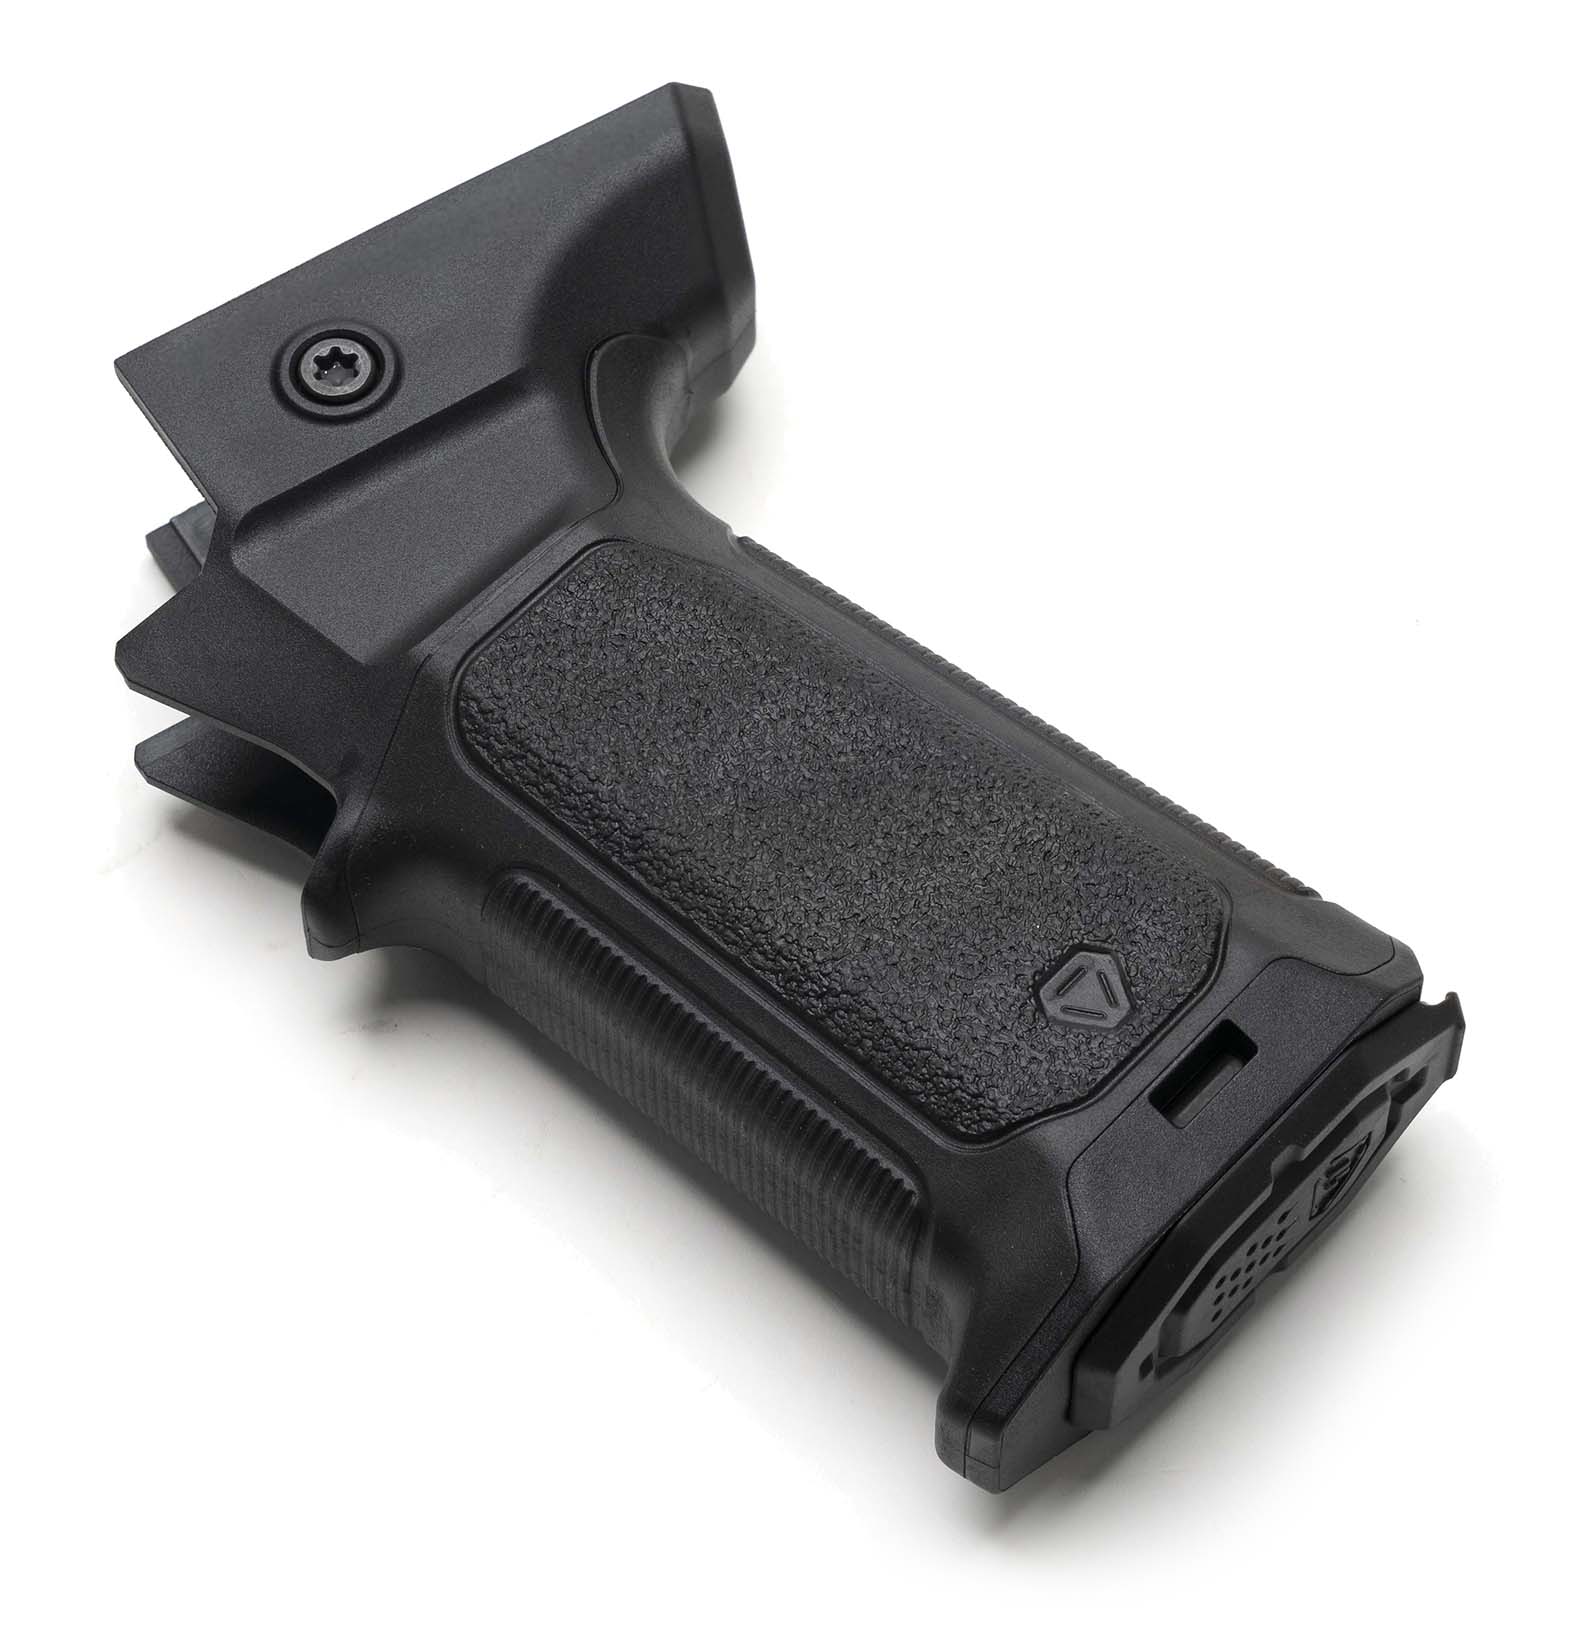 Strike Industries Releases New AR Multi-Angle Pistol Grip - The